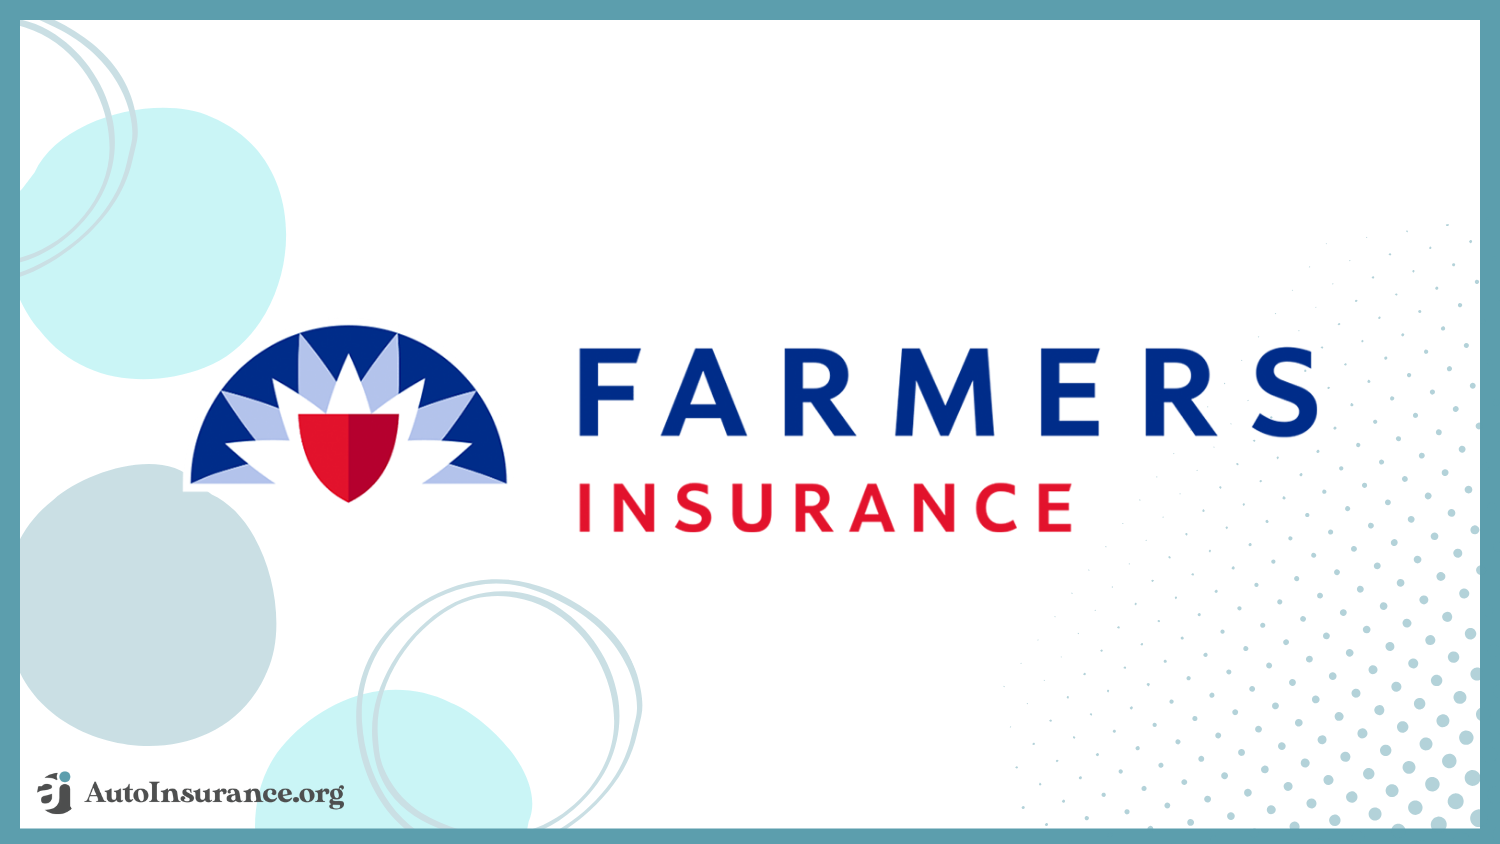 Farmers: Best Auto Insurance for Hybrid Vehicles